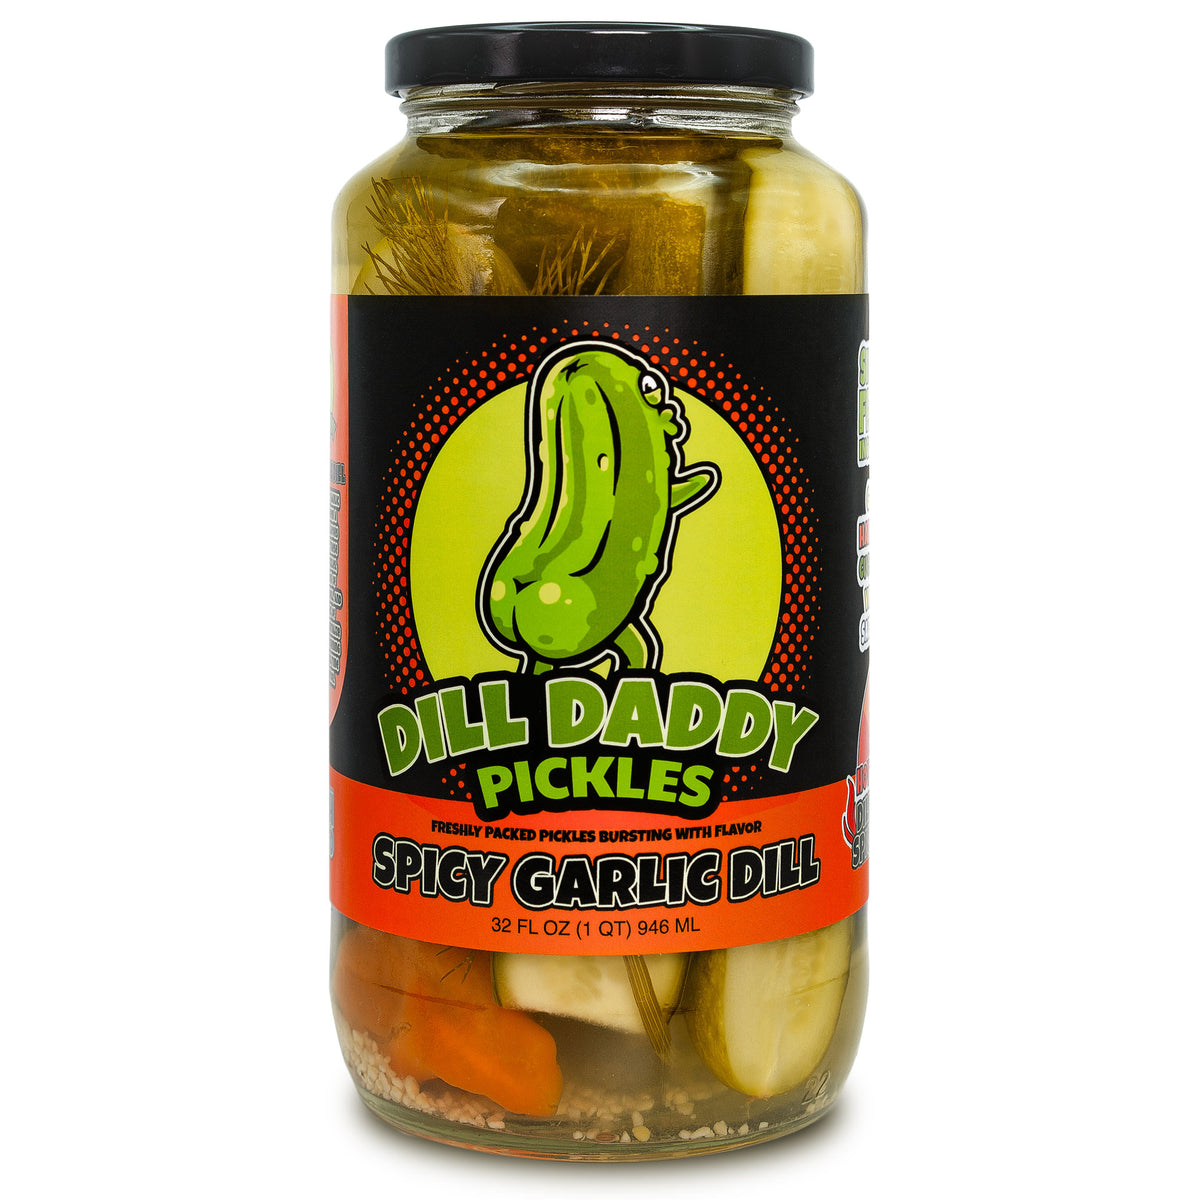 Dill Daddy Pickles